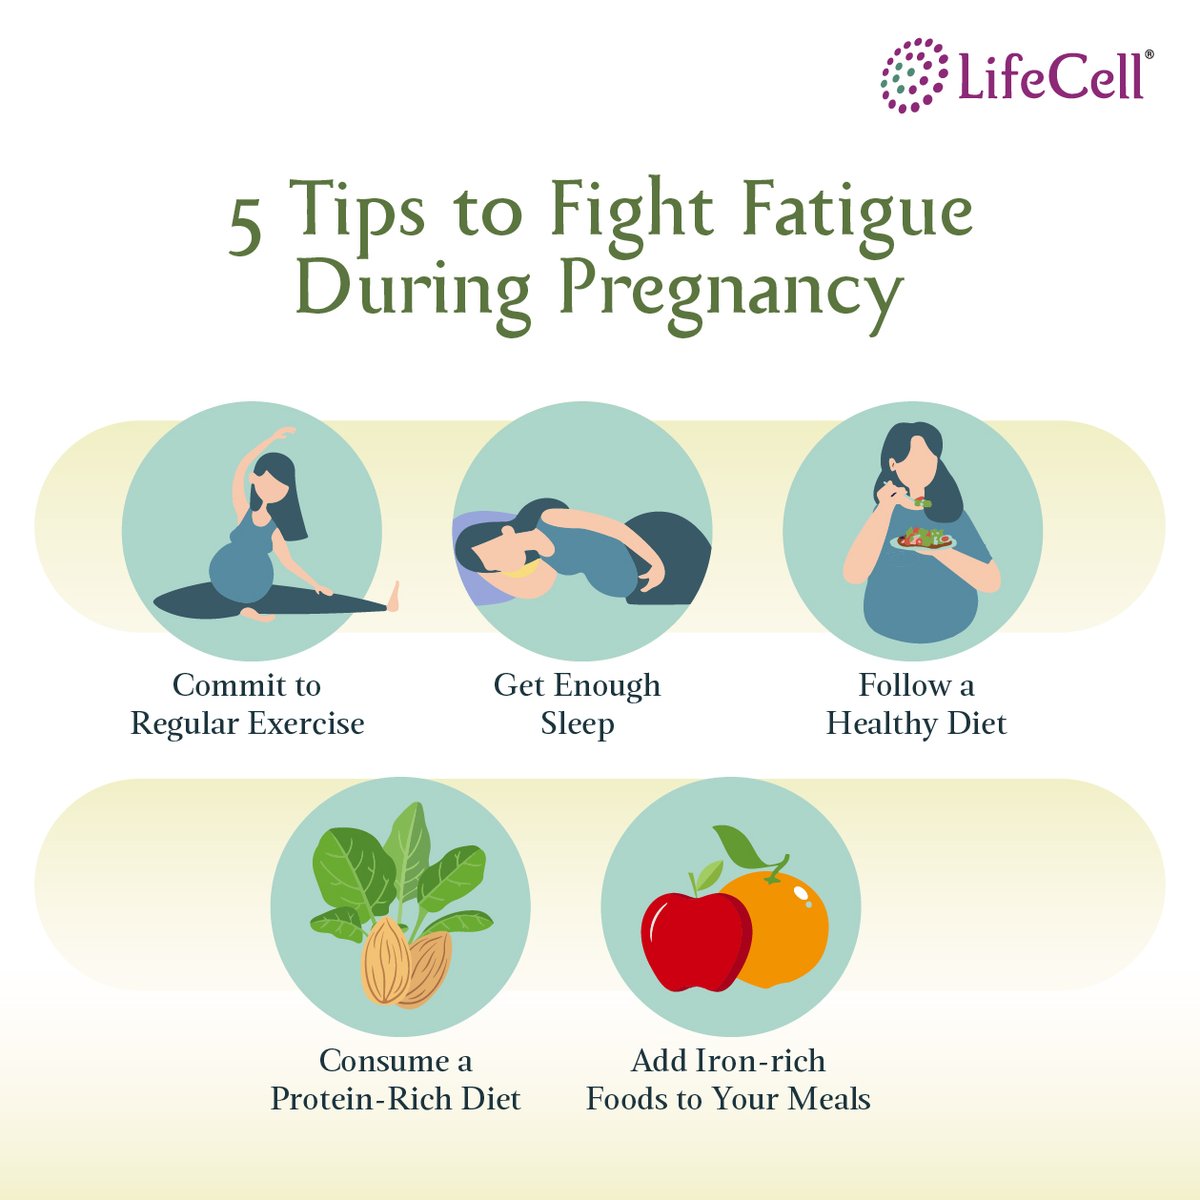 There are many reasons why women feel tired during #pregnancy. 
Higher levels of #estrogen and progesterone 
Lower blood pressure
Disrupted #sleep 
#Morningsickness and #Heartburn
Want to learn more #pregnancy #wellness tips like this? Stay tuned.